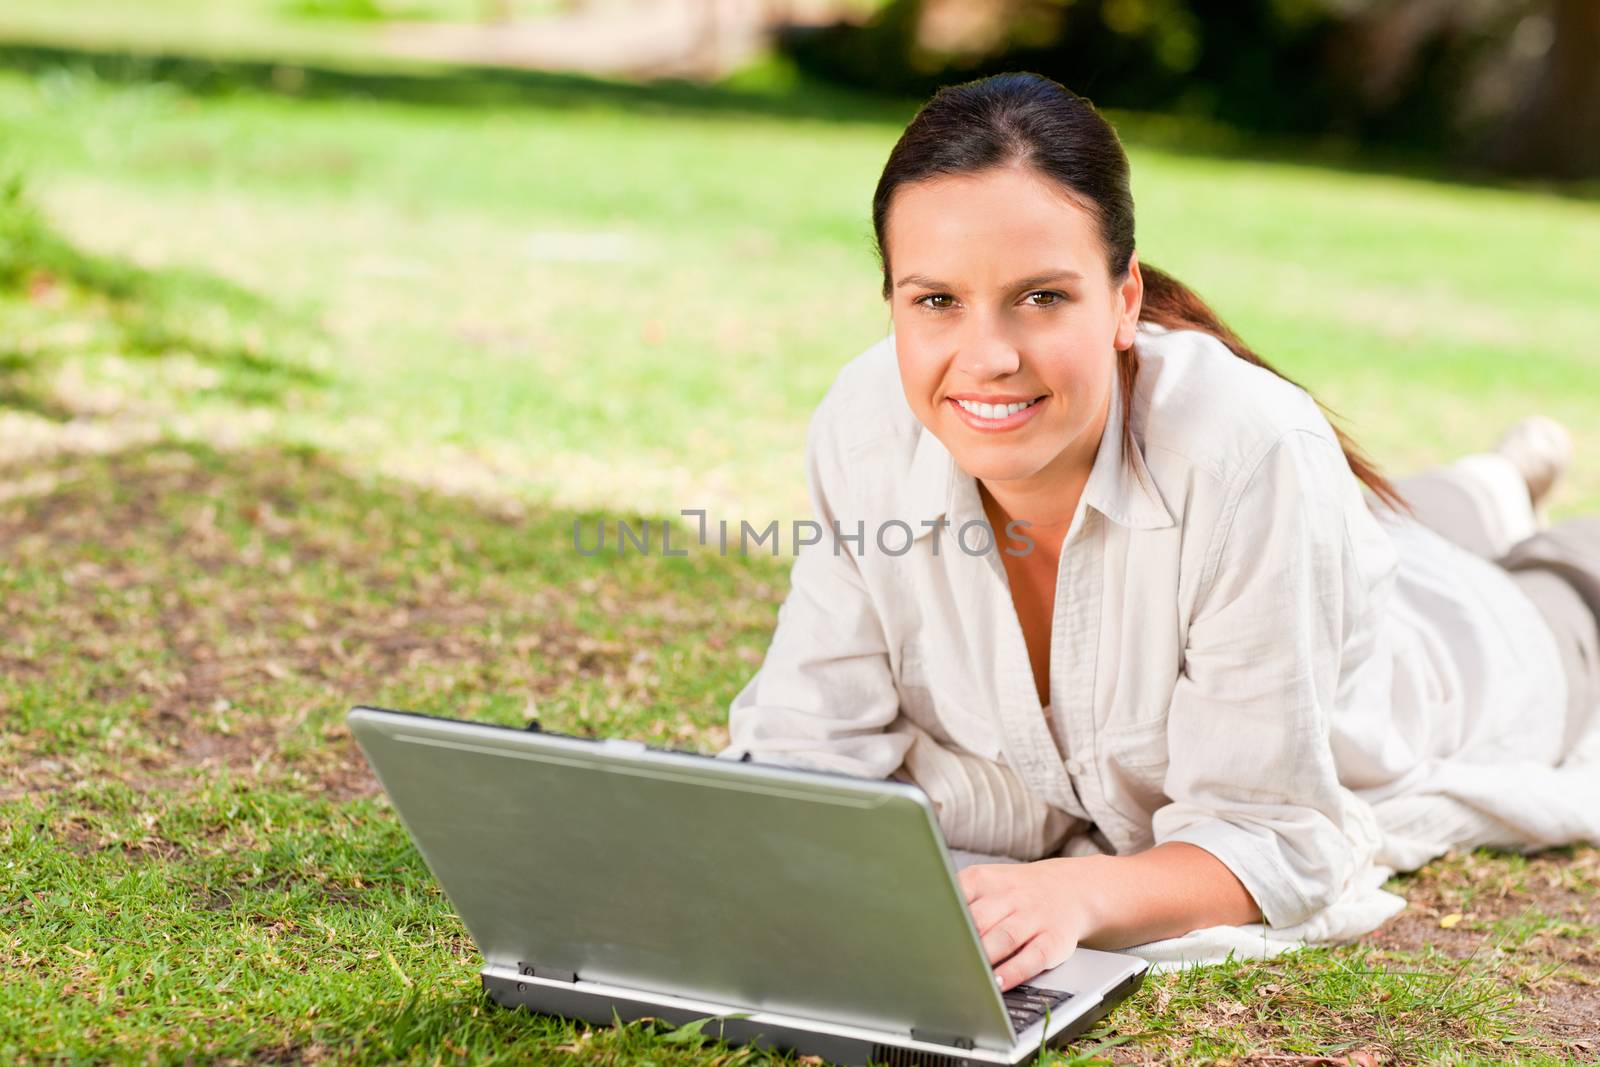 Woman working on her laptop in the park during the summer